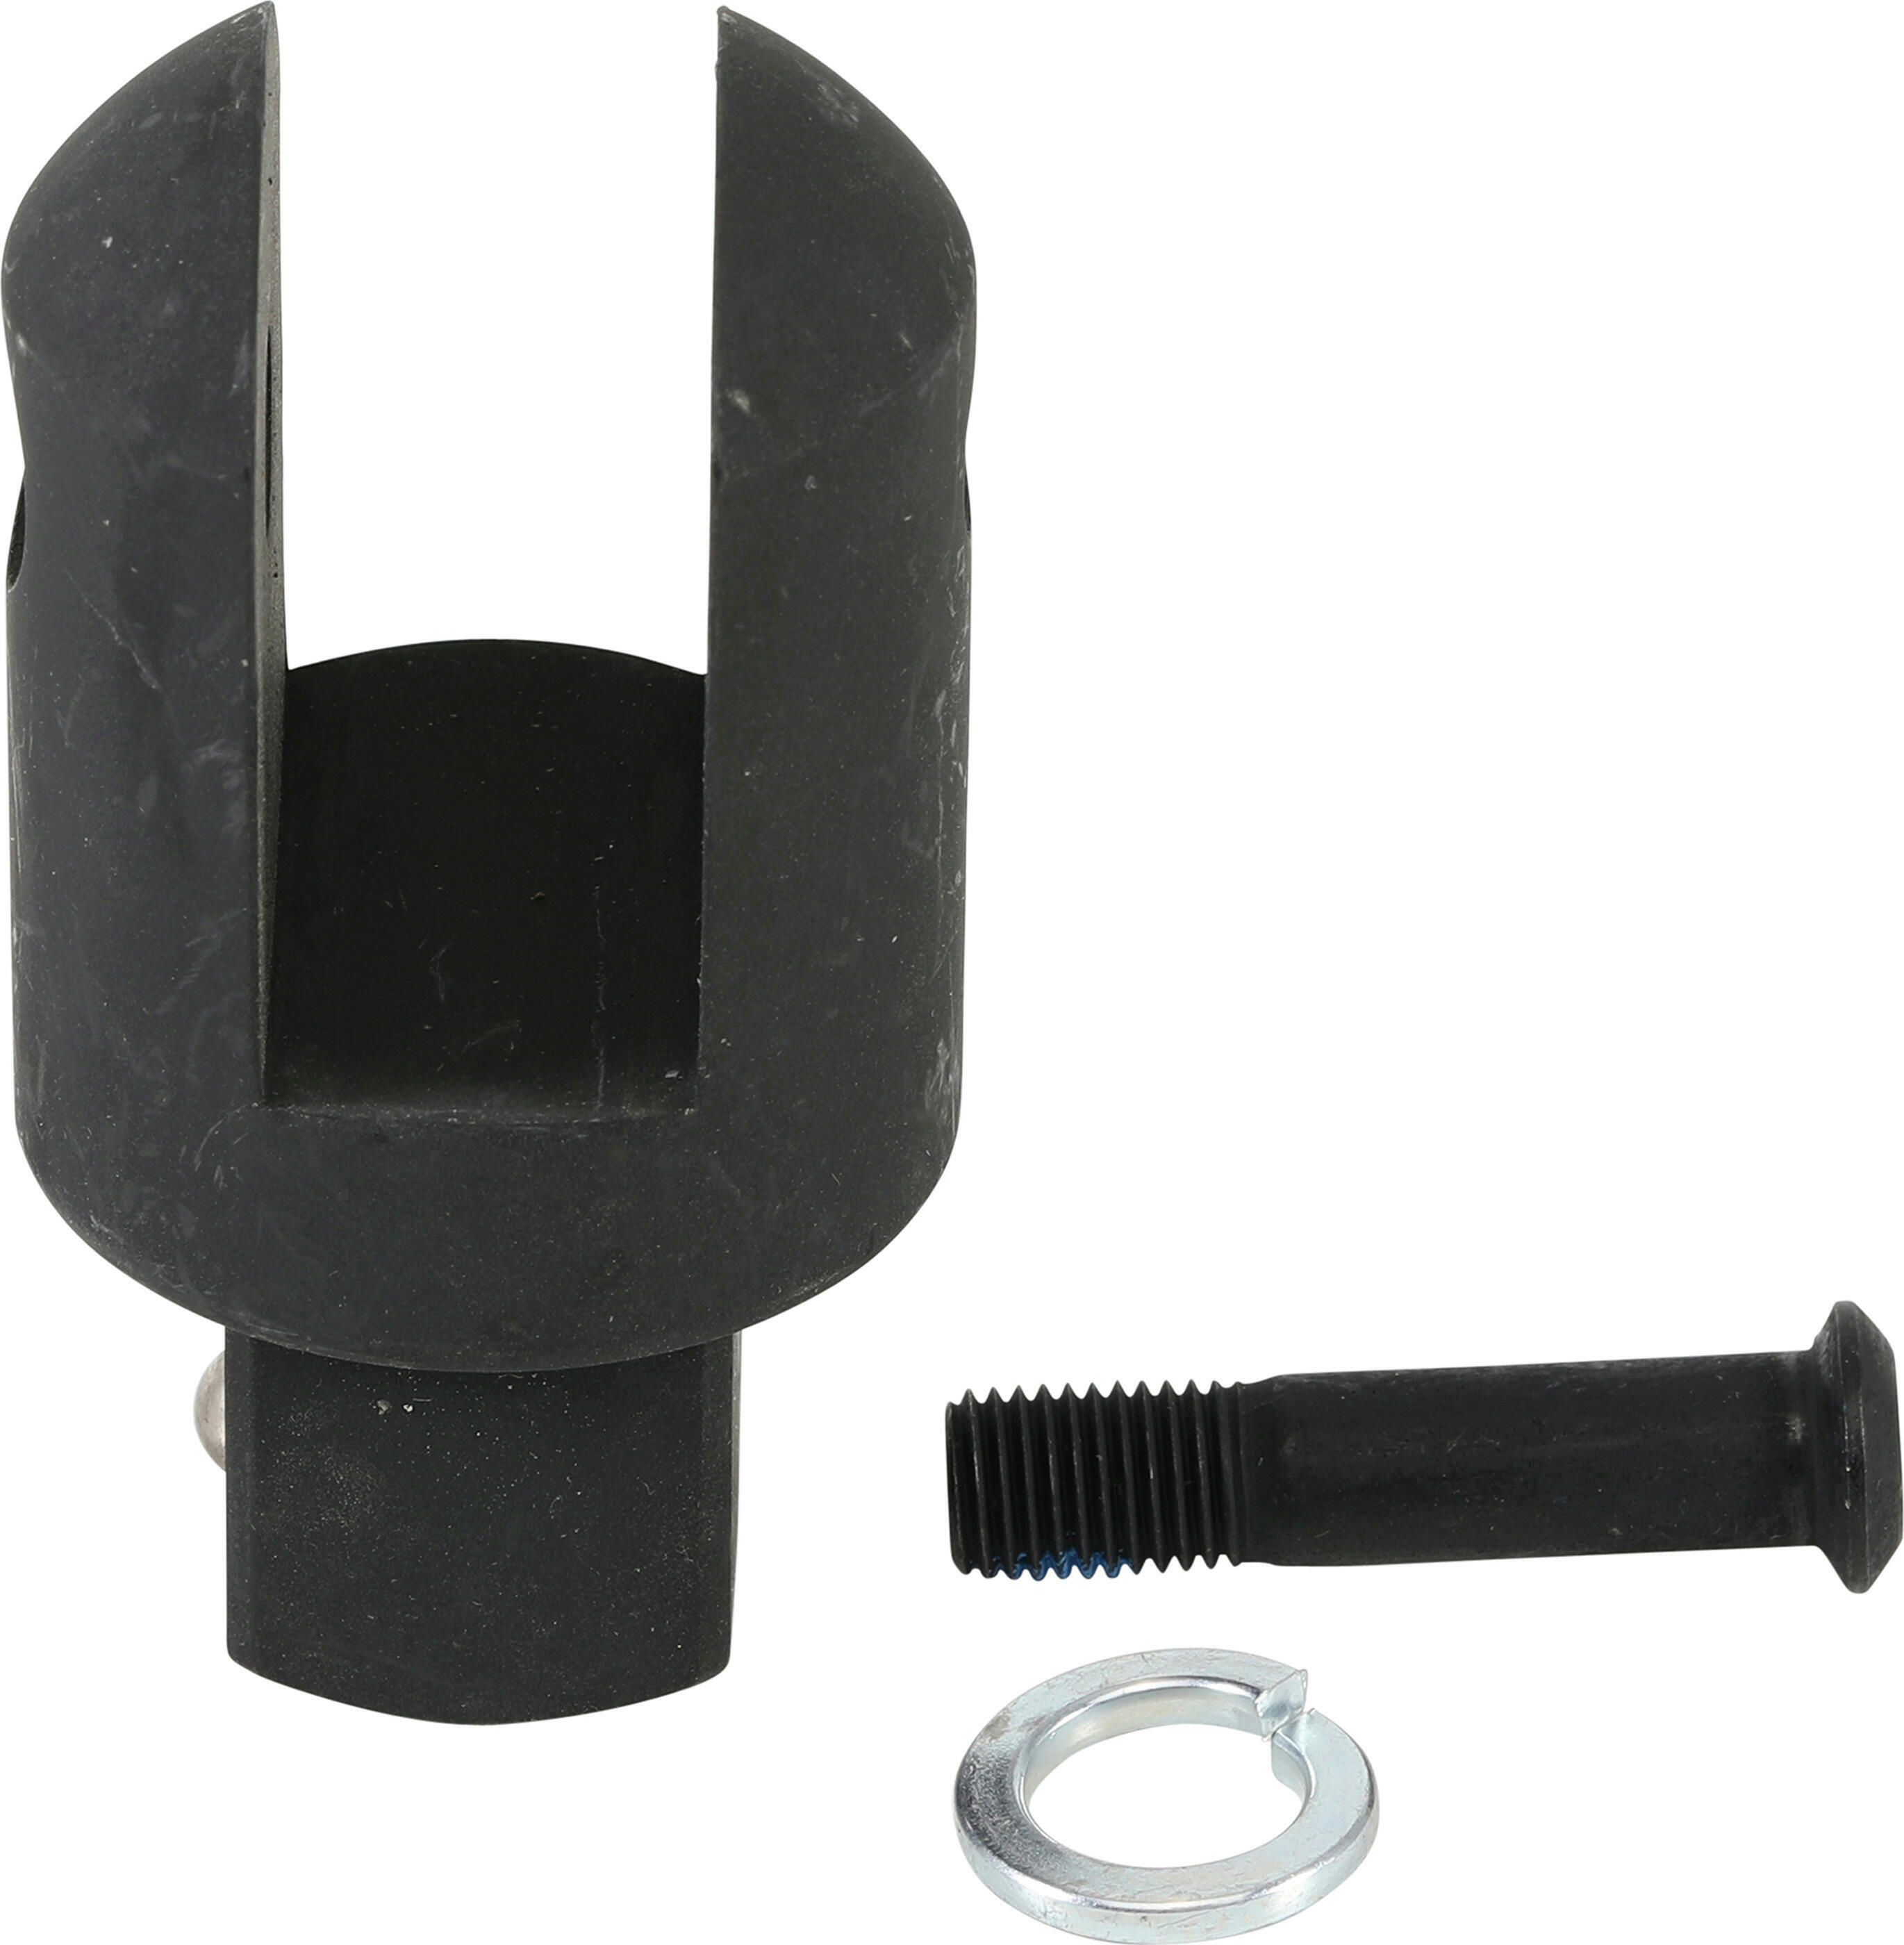 BGS Repair Kit, bar with universal joint